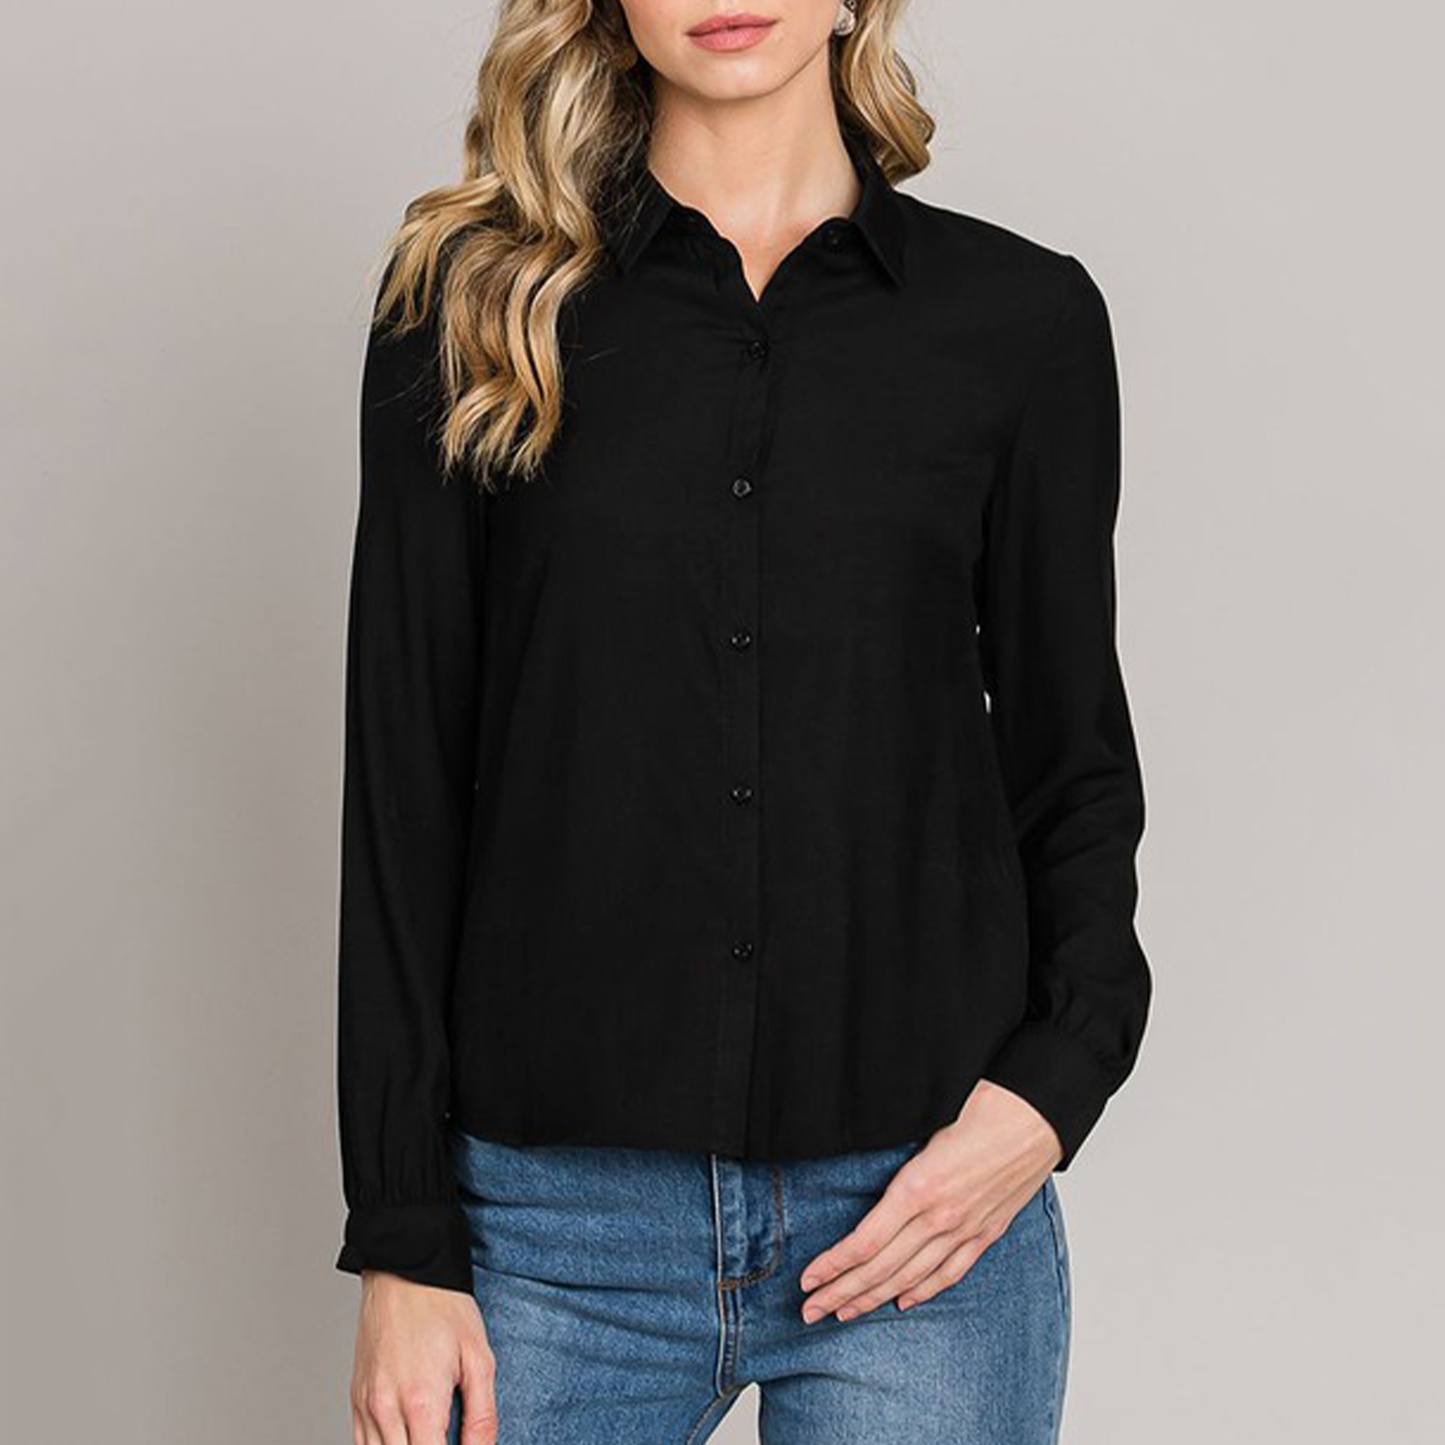 Classic Satin Button Down Shirt. The classic button-up gets a luxe remix with a satin fabric that lets you layer luster into your outfit of the day (or night)